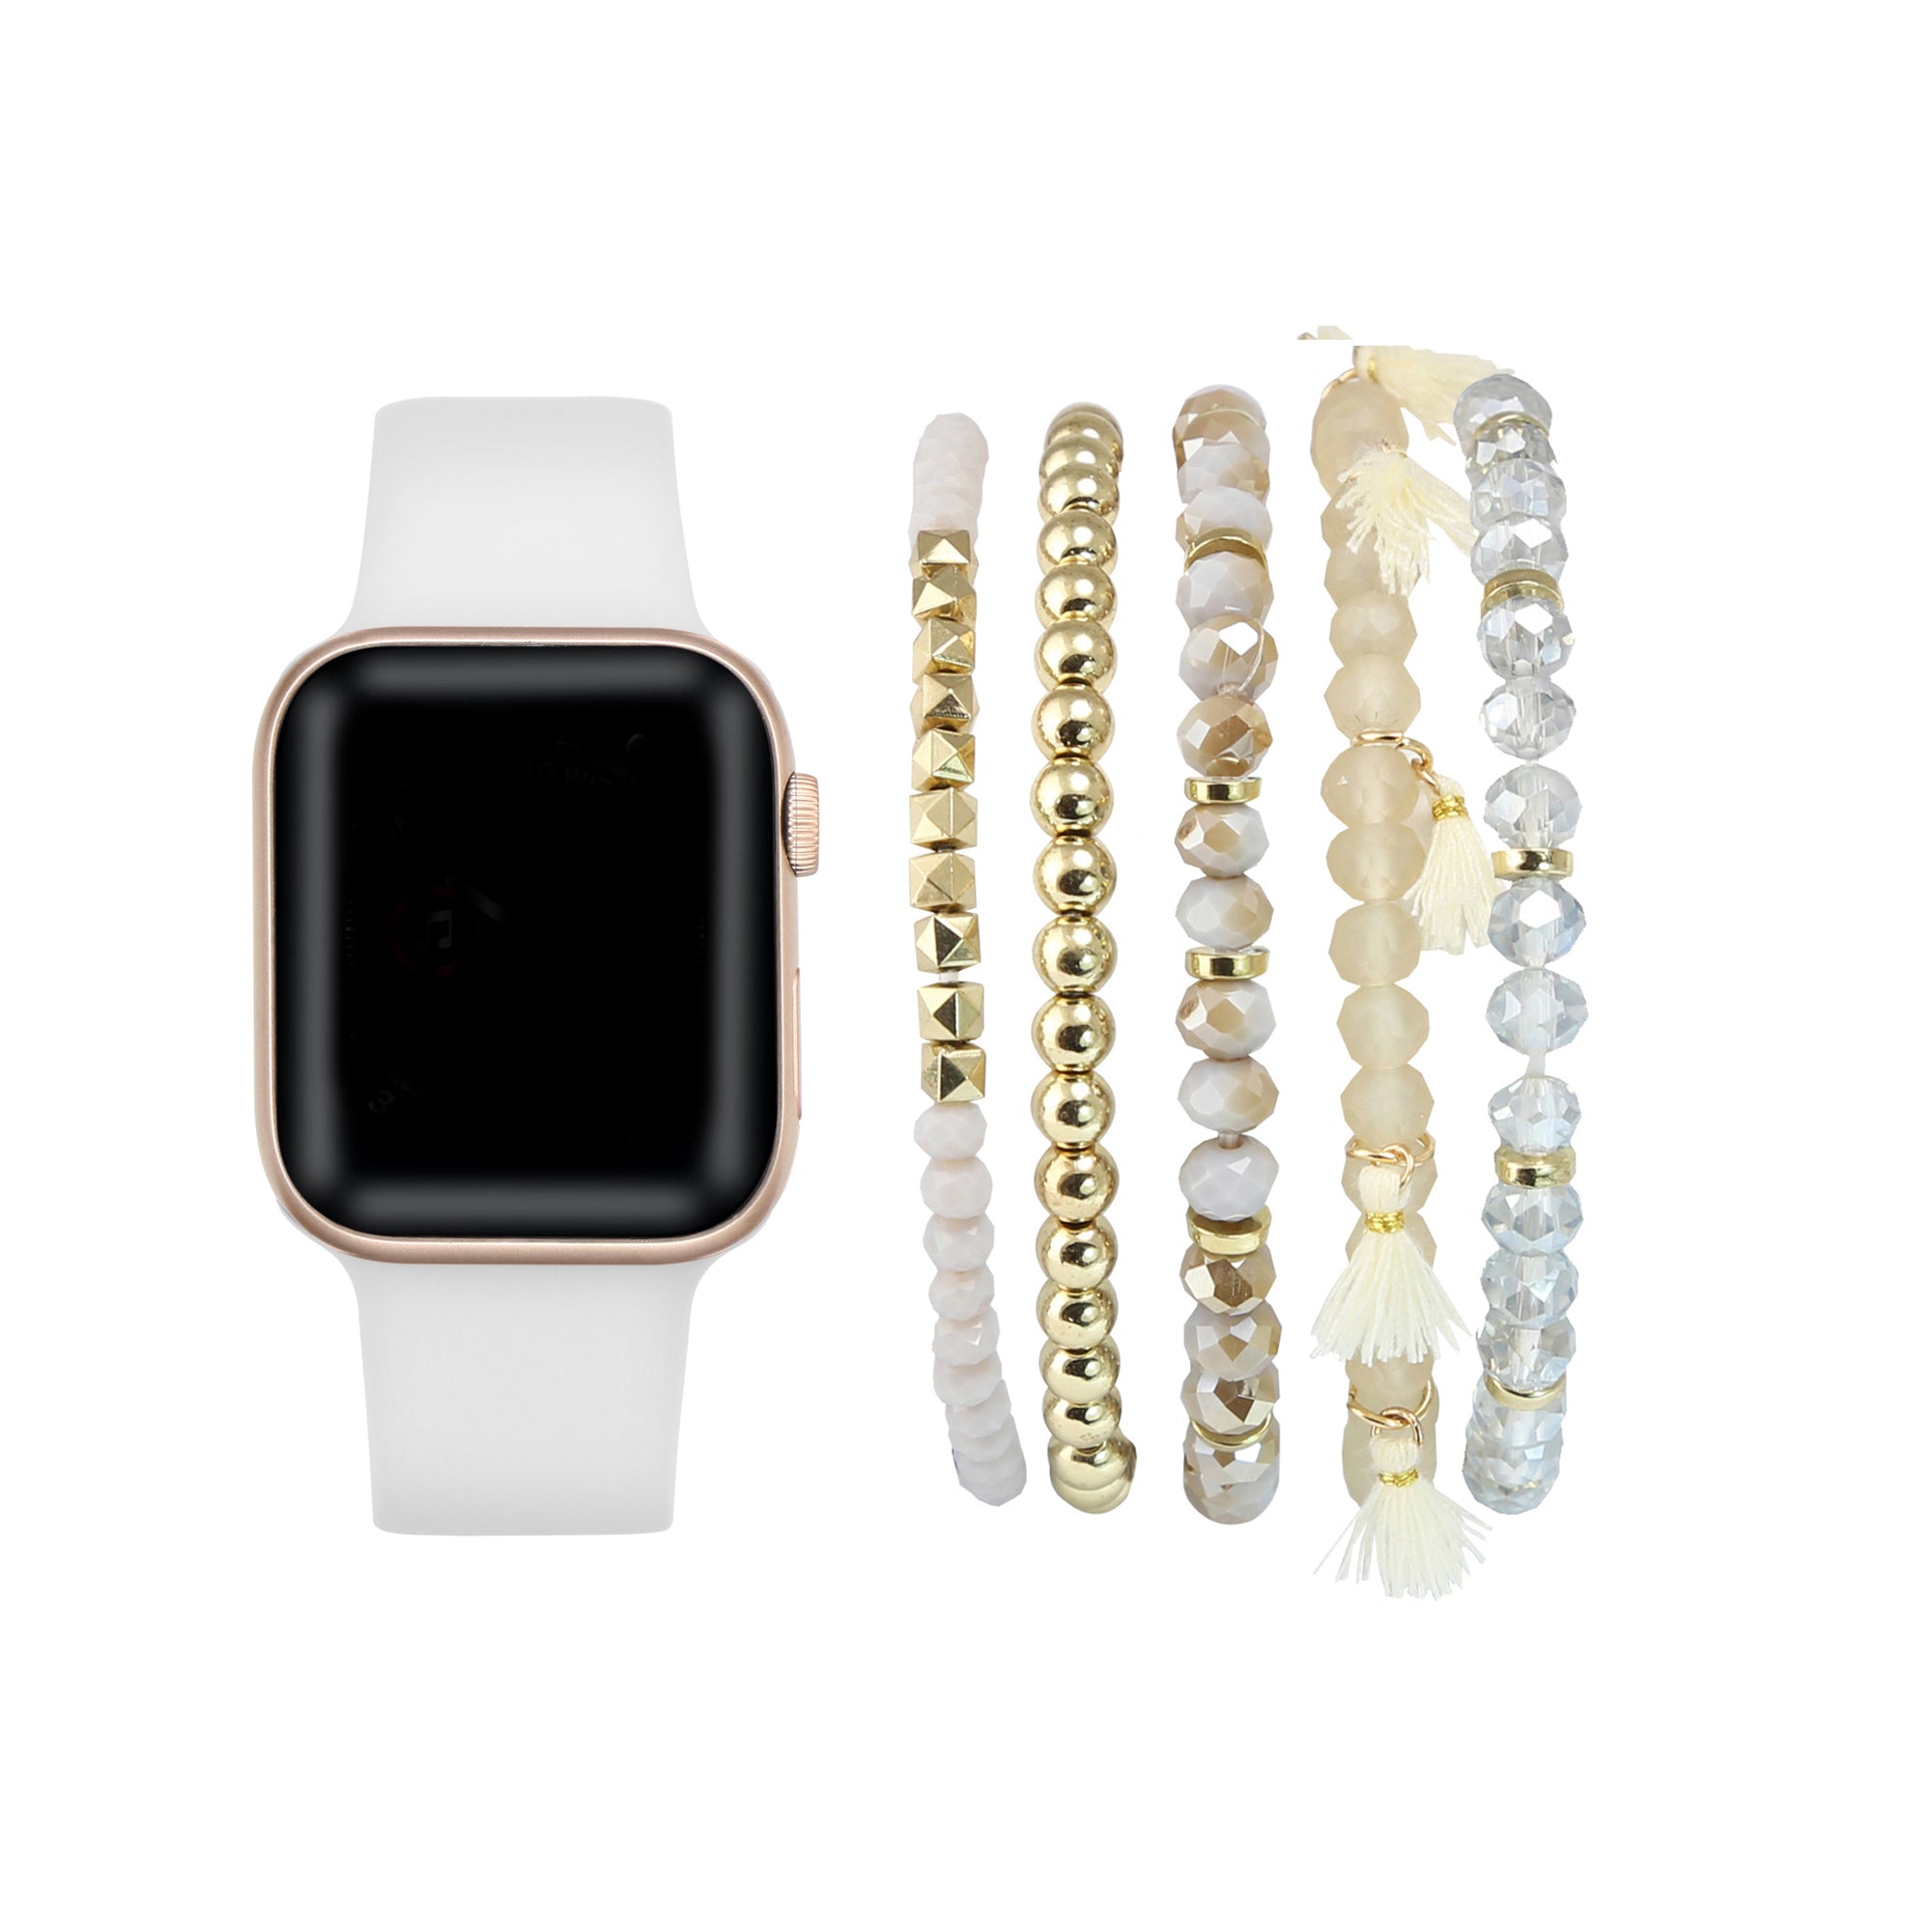 Silicone Band For Apple Watch  and Bracelet Bundle